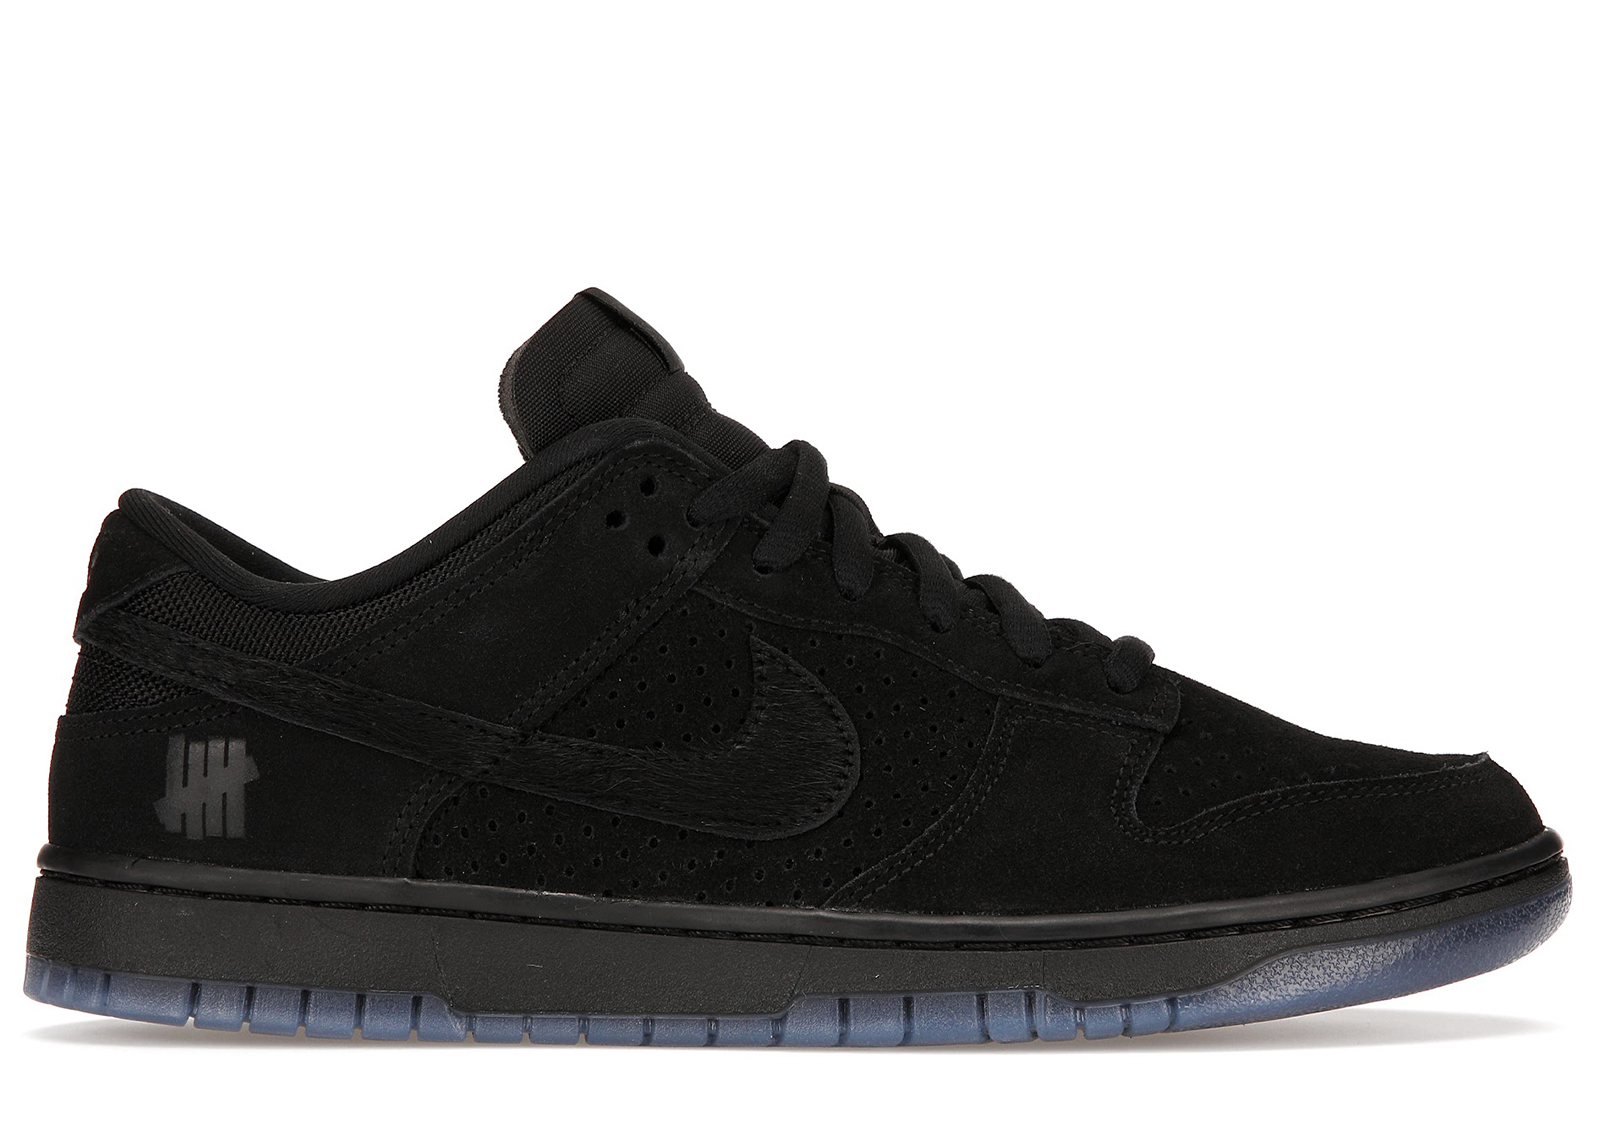 UNDEFEATED × NIKE DUNK LOW SP "BLACK